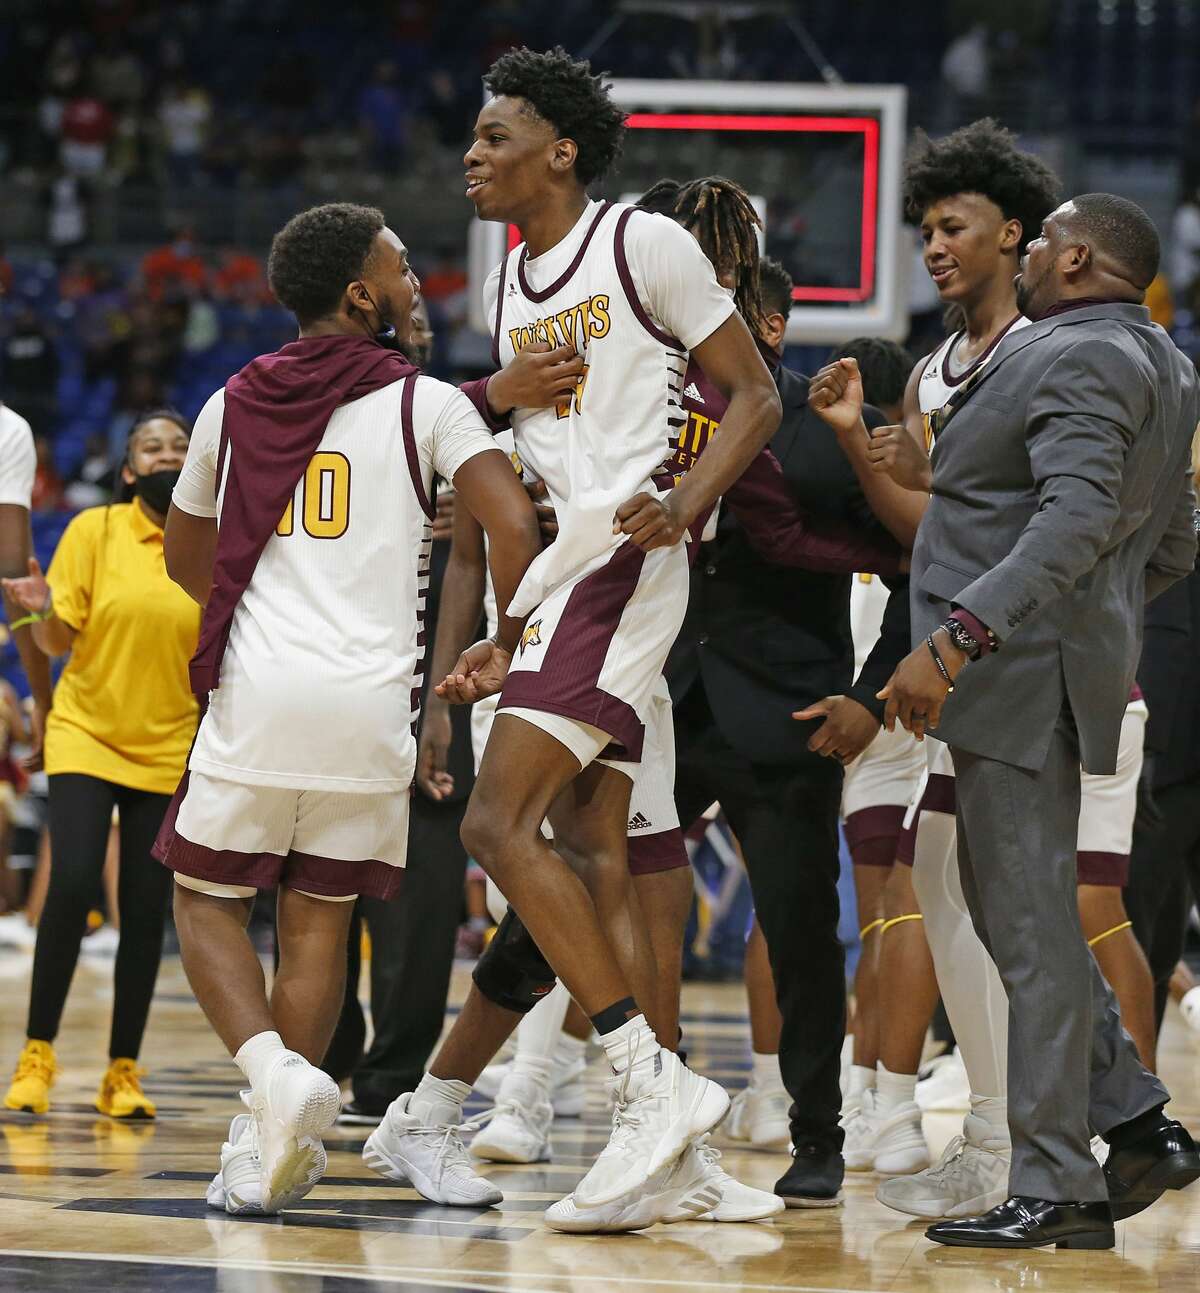 Beaumont United Terrance Arceneaux #23celebrates with teammates after hitting winning three in OT. Beaumont United vs. Dallas Kimball in Class 5A state championship at the Alamodome on Friday, 2021